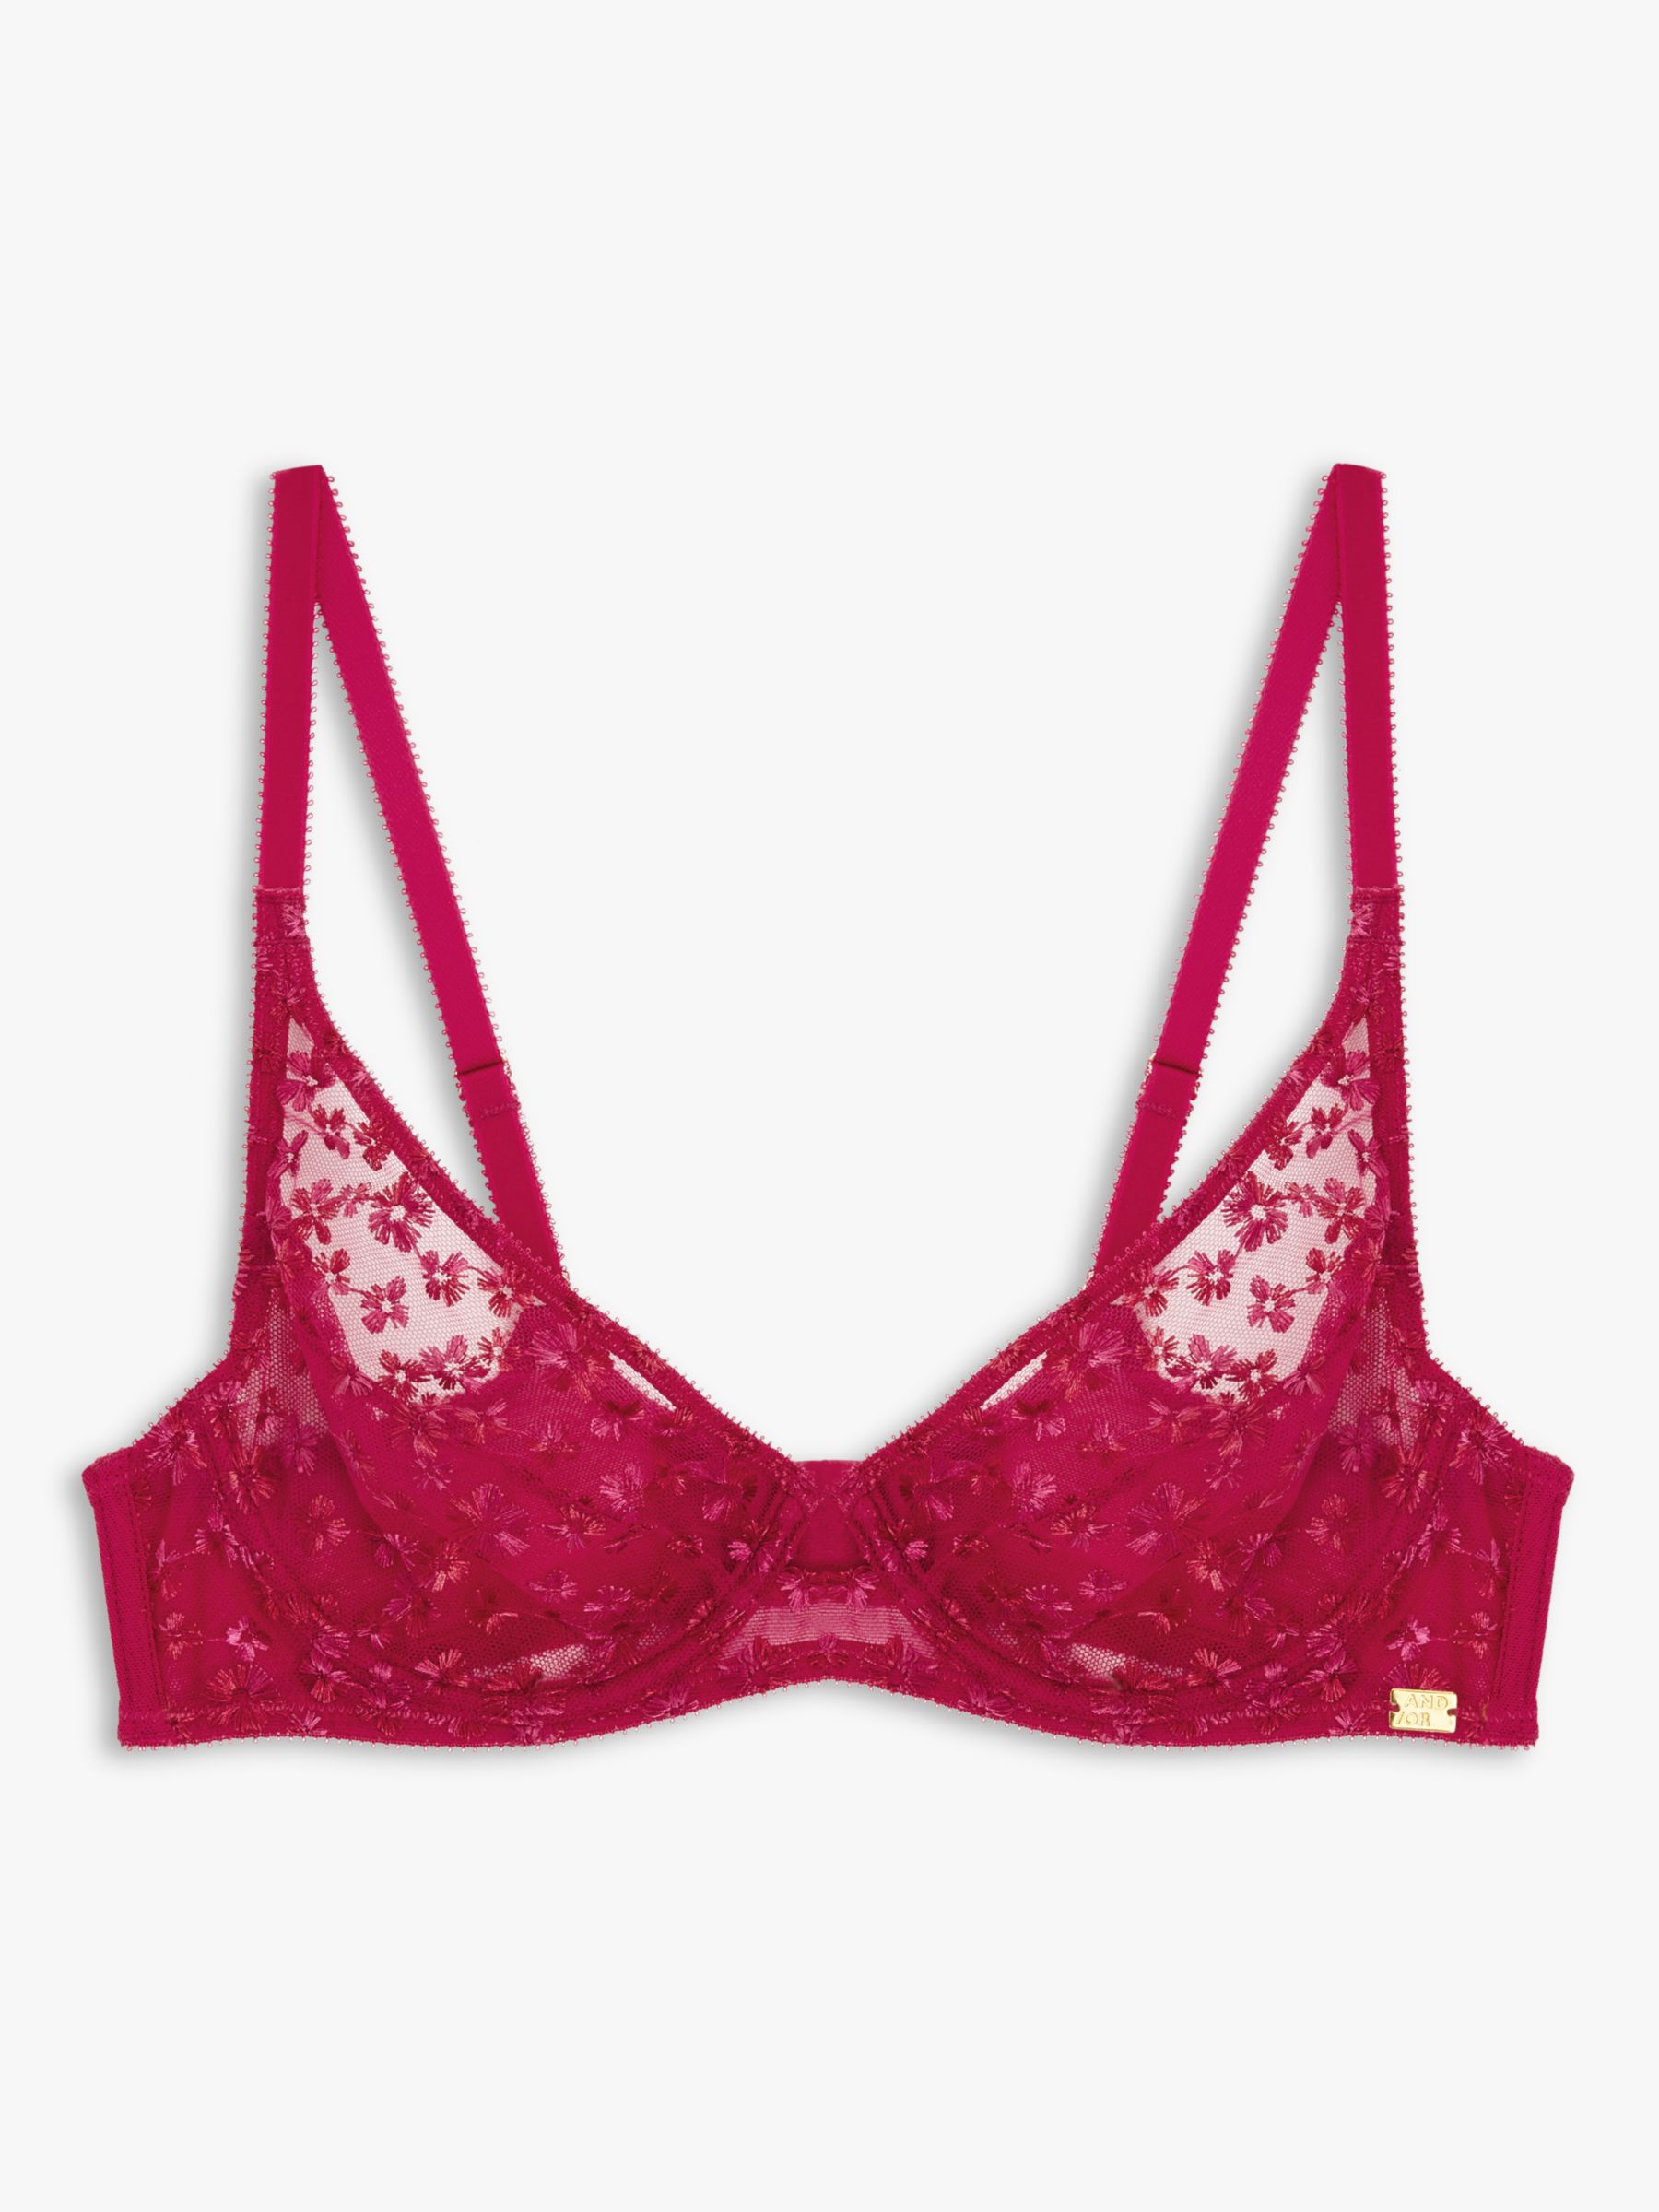 AND/OR Sienna Ditsy Hi Apex Non Padded Underwired Bra, Pink Ombre, 32B